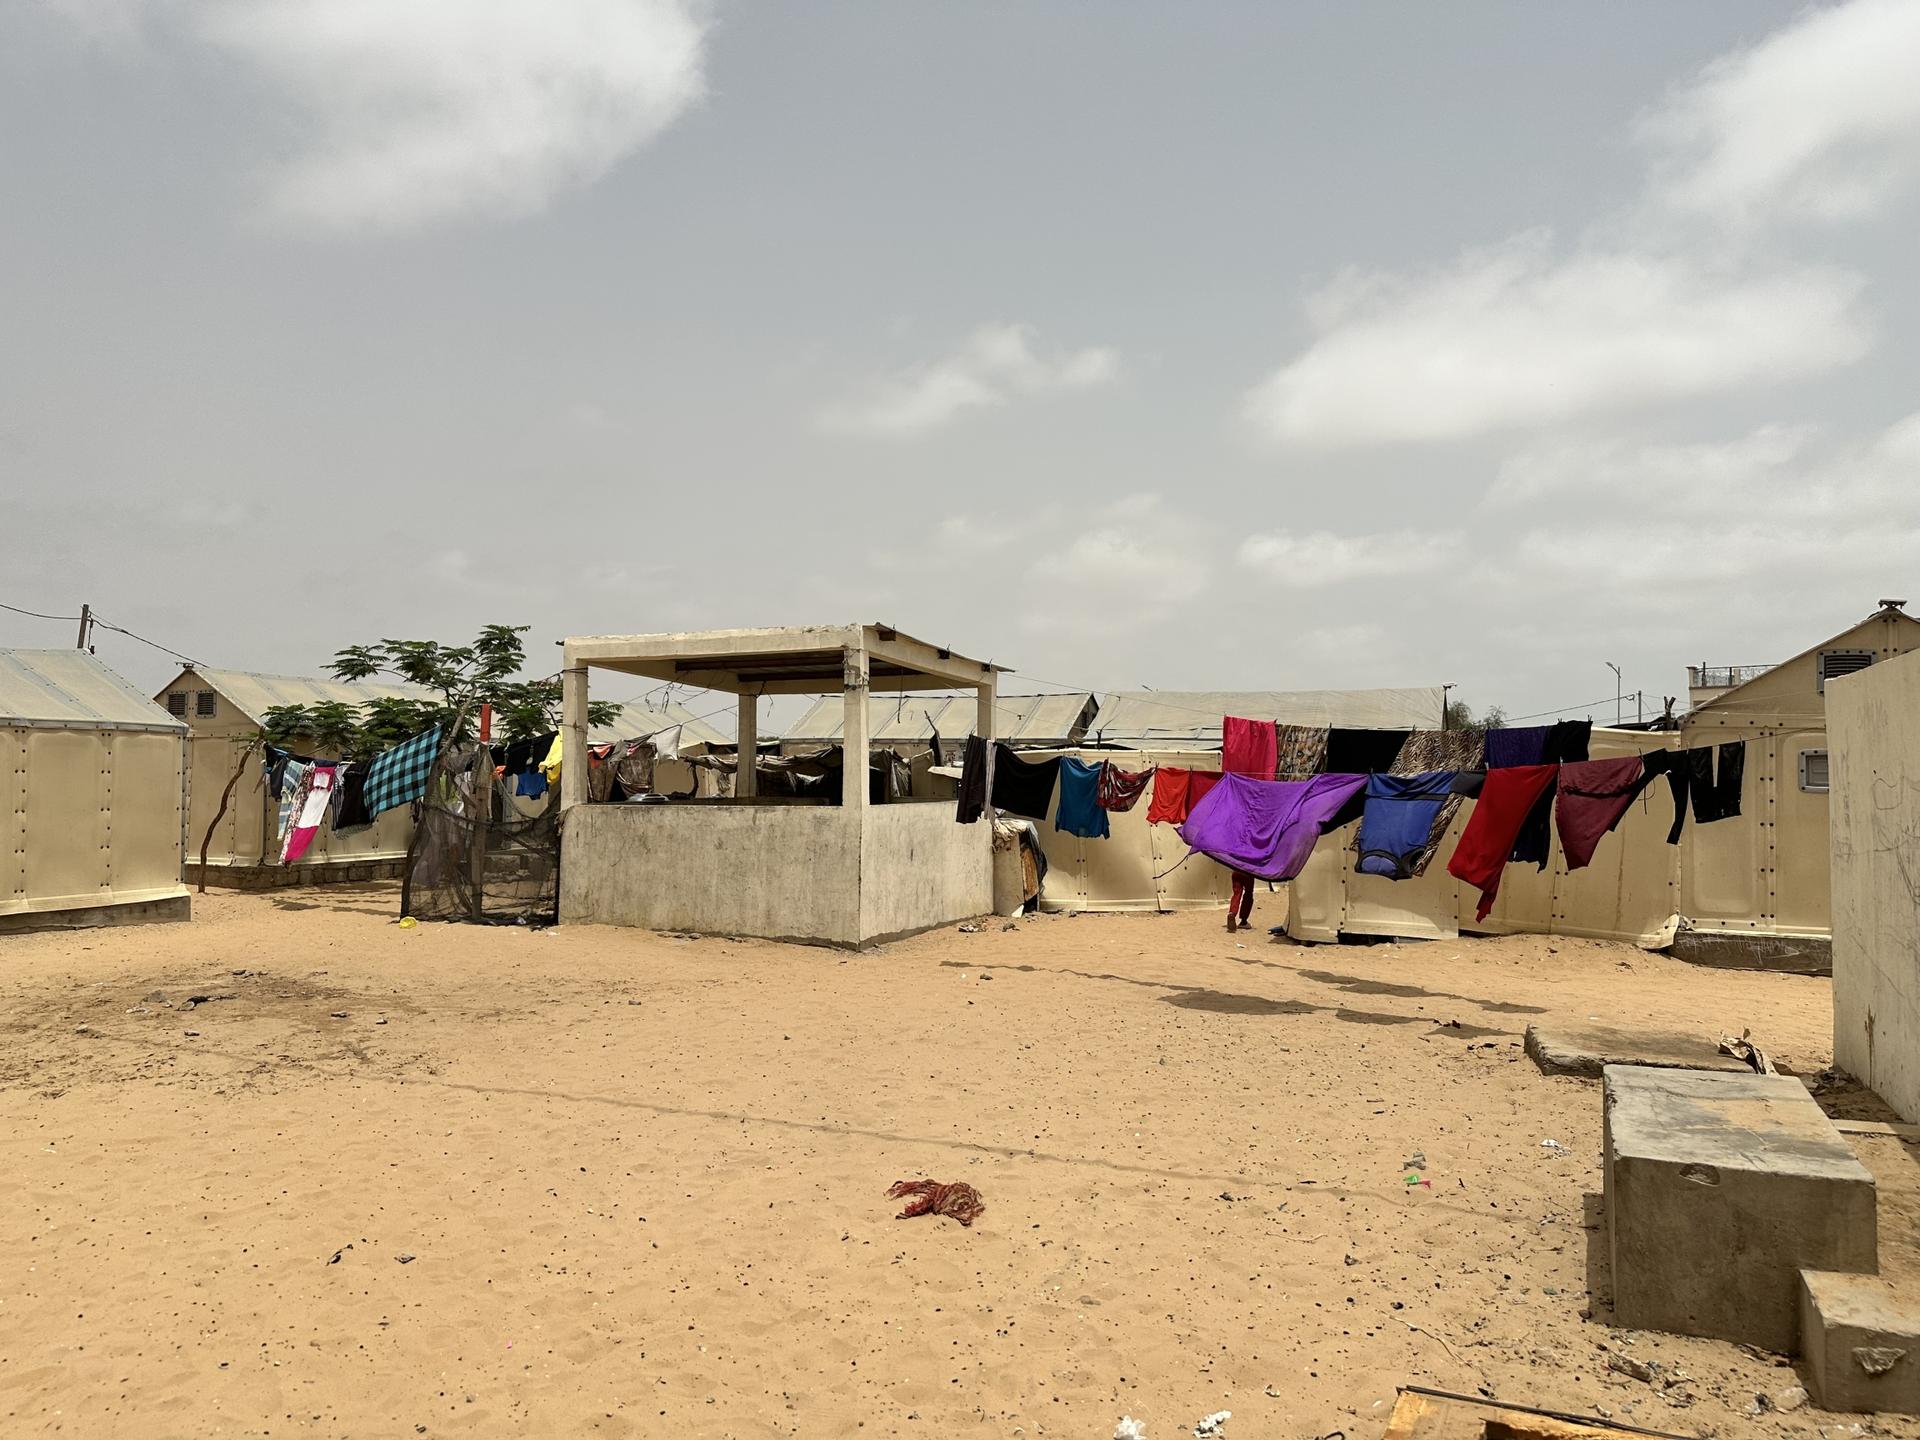 The Diougop camp, where some 1,500 people were displaced by sea level rise, is surrounded by sand.